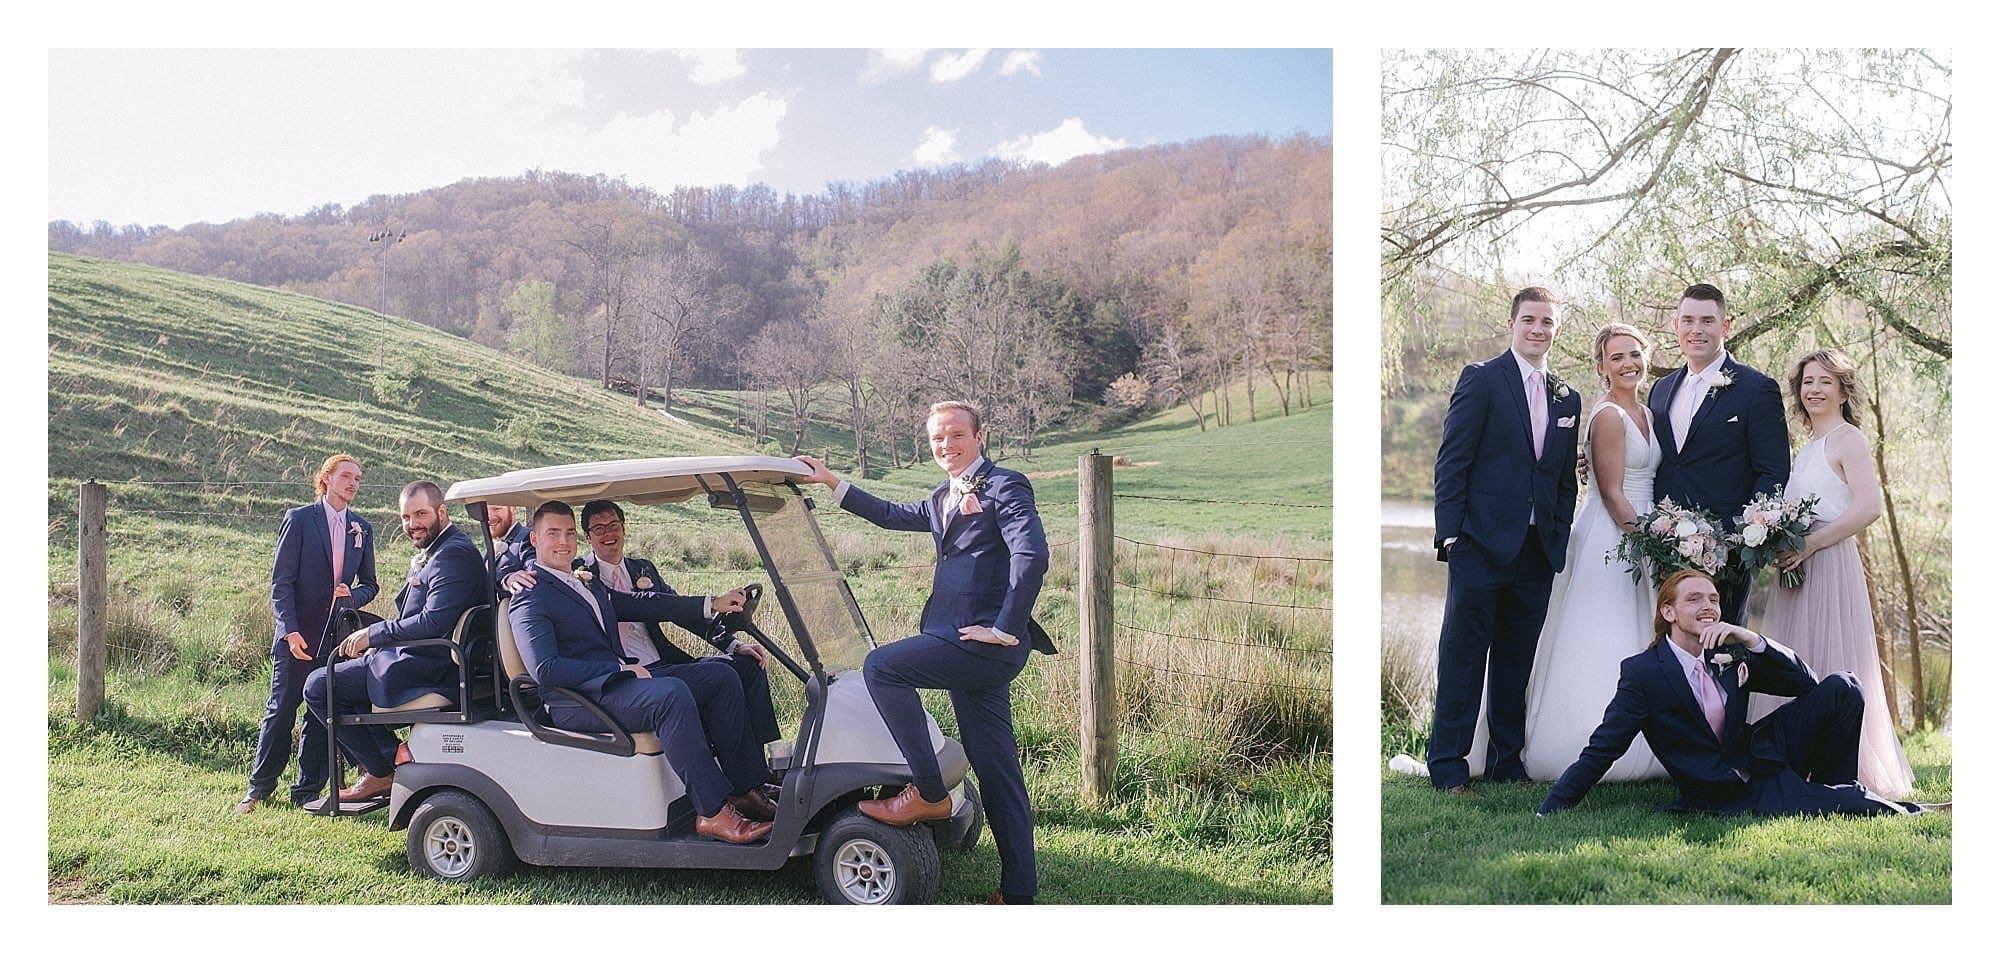 Wedding party posing beside pond under willow tree and groomsmen posing on golf cart